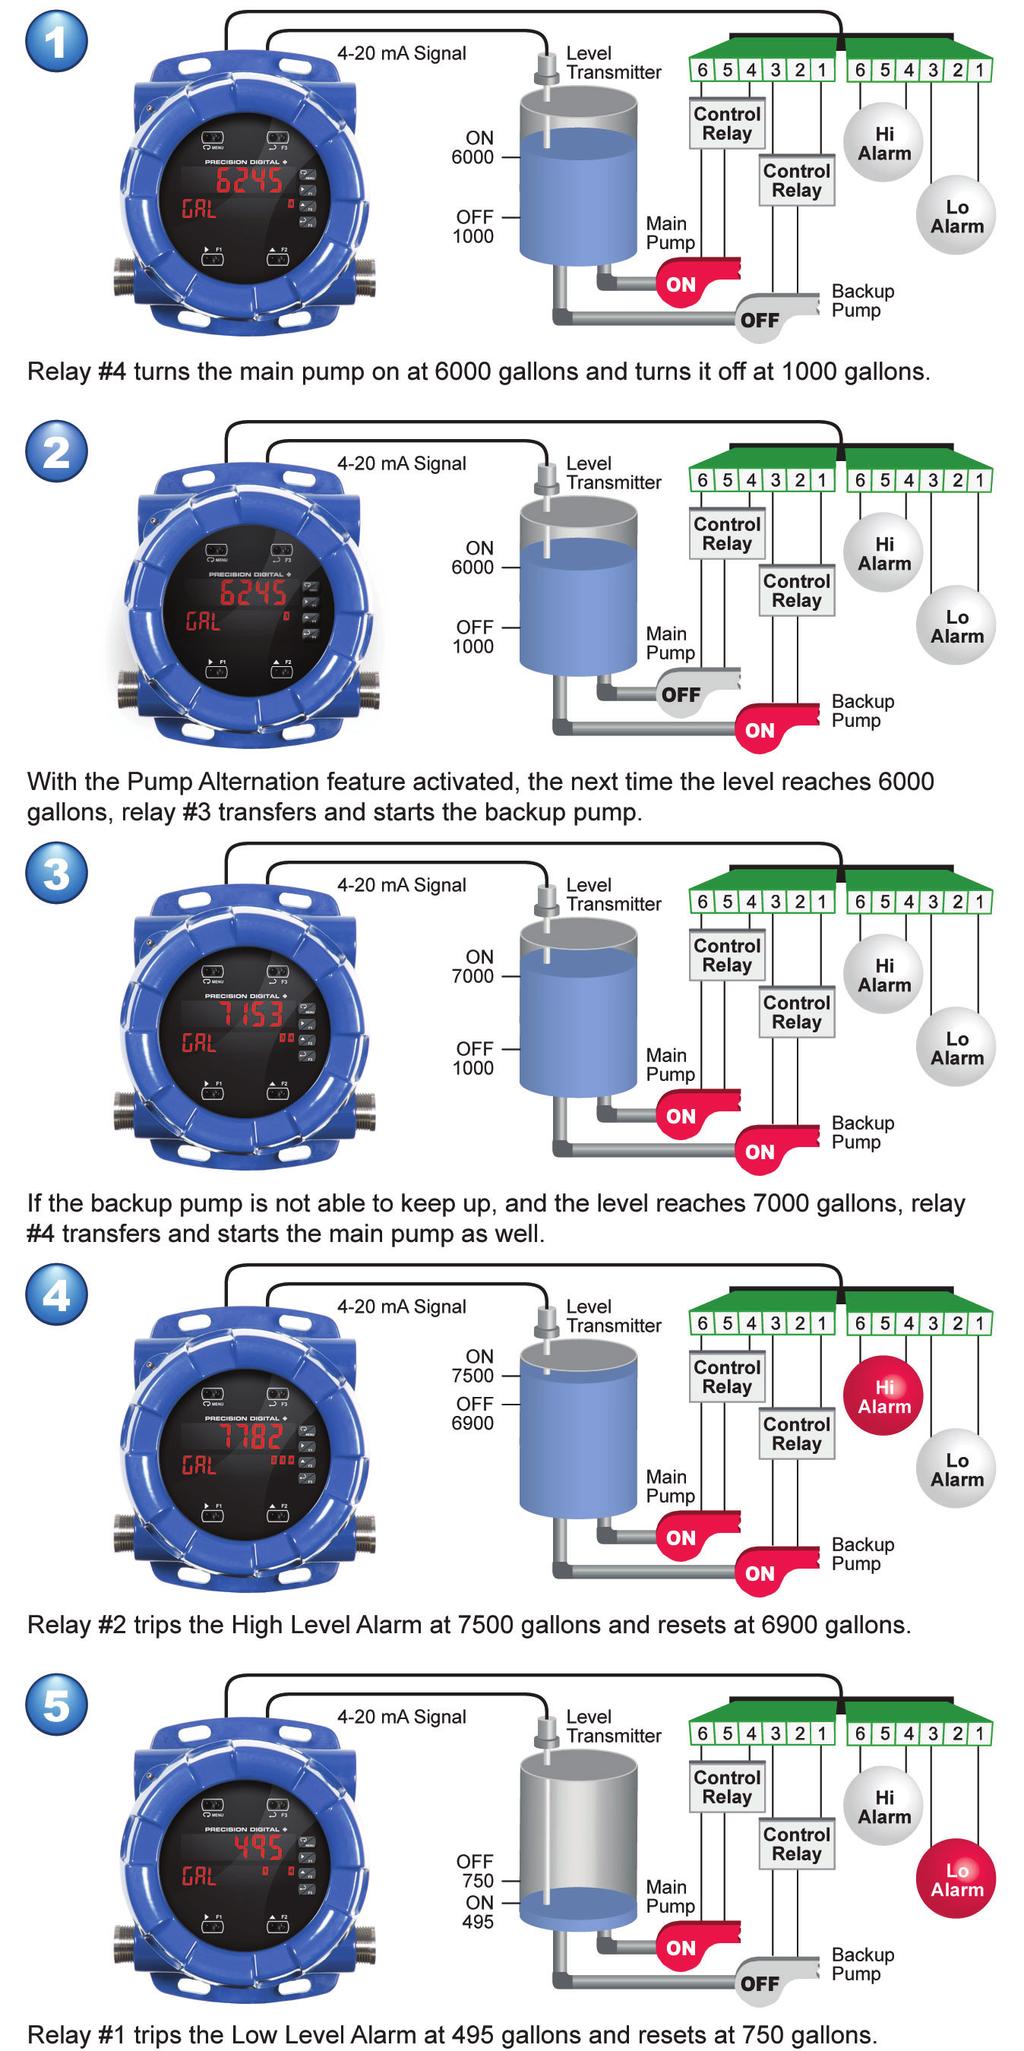 PD8-000 ProtEX-MAX Explosion-Proof Process Meter Dimensions Multi-Pump Alternation Up to 8 pumps can be